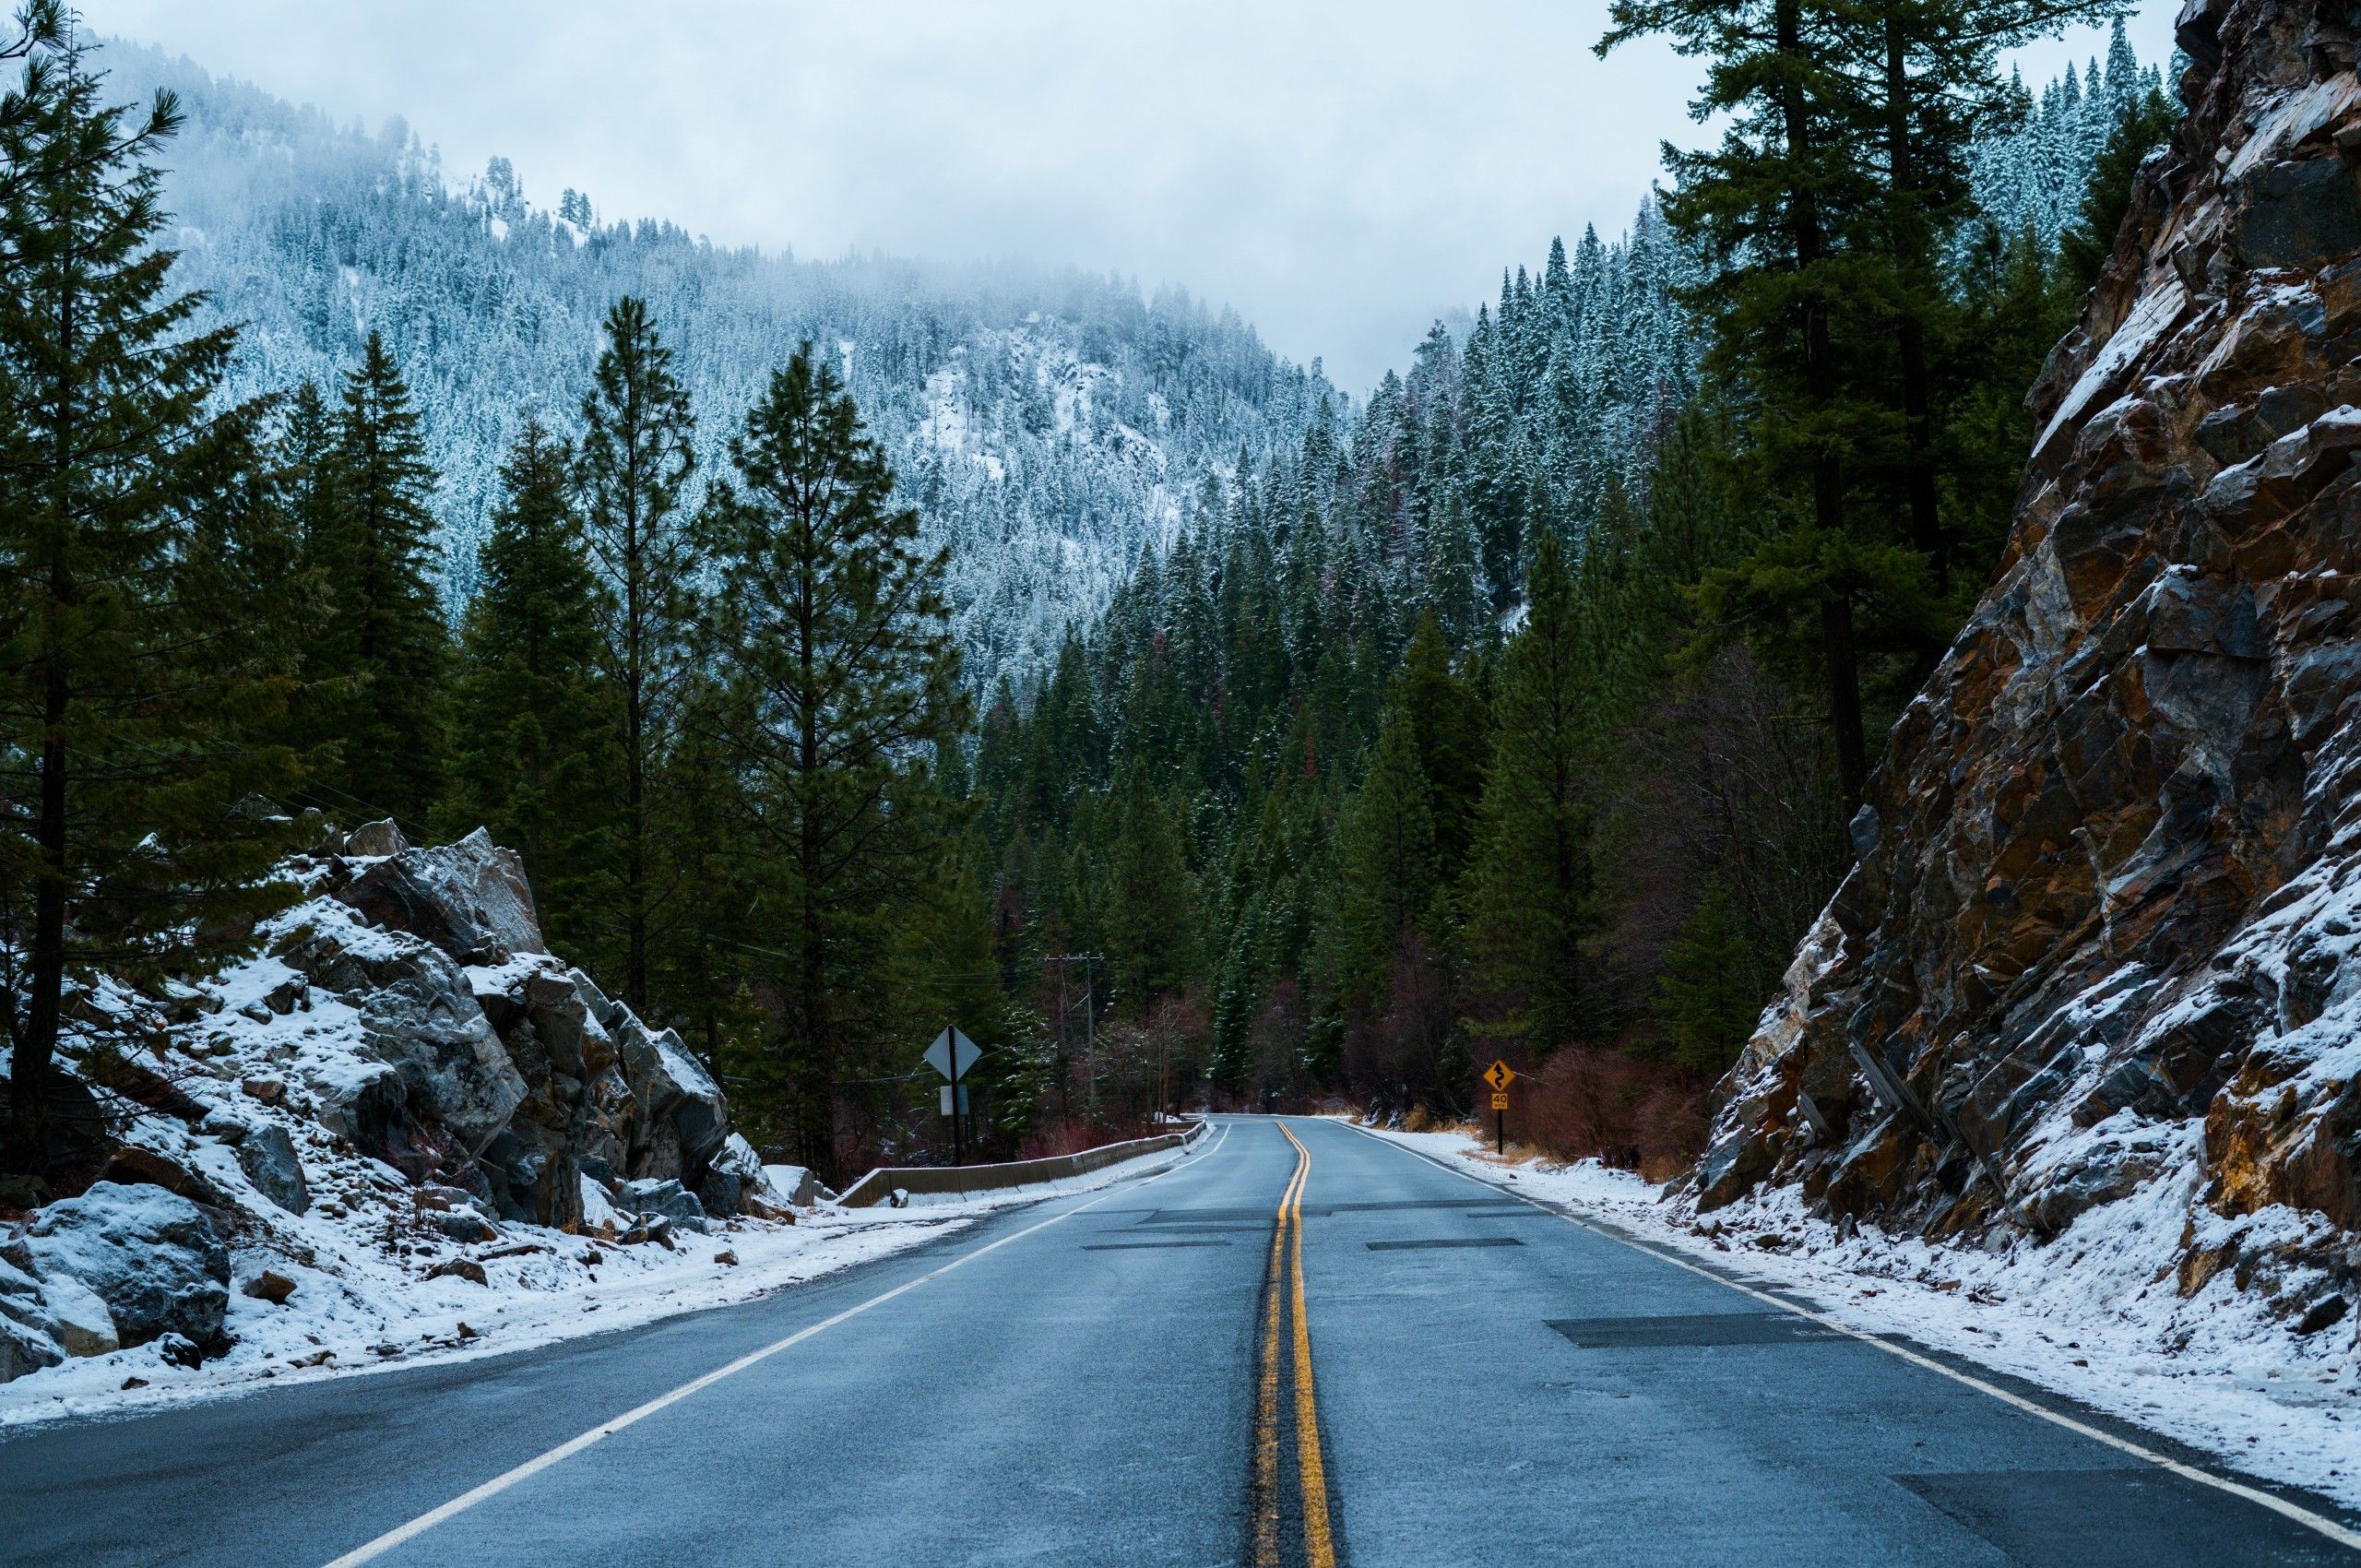 Download 2560x1700 Road, Snow, Forest, Mountain, Rock, Winter Wallpaper for Chromebook Pixel